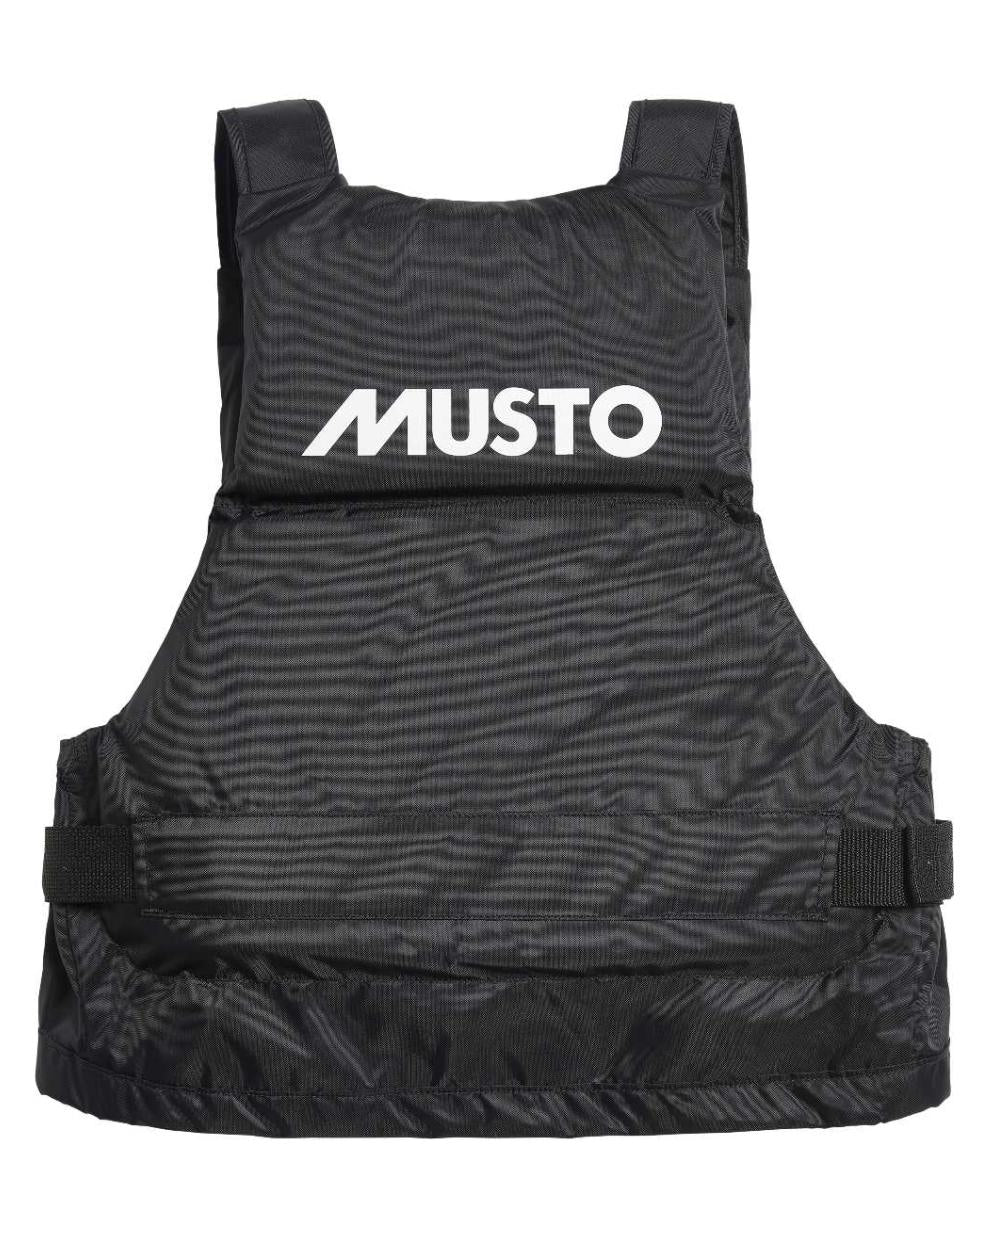 Black Coloured Musto Buoyancy Aid On A White Background 